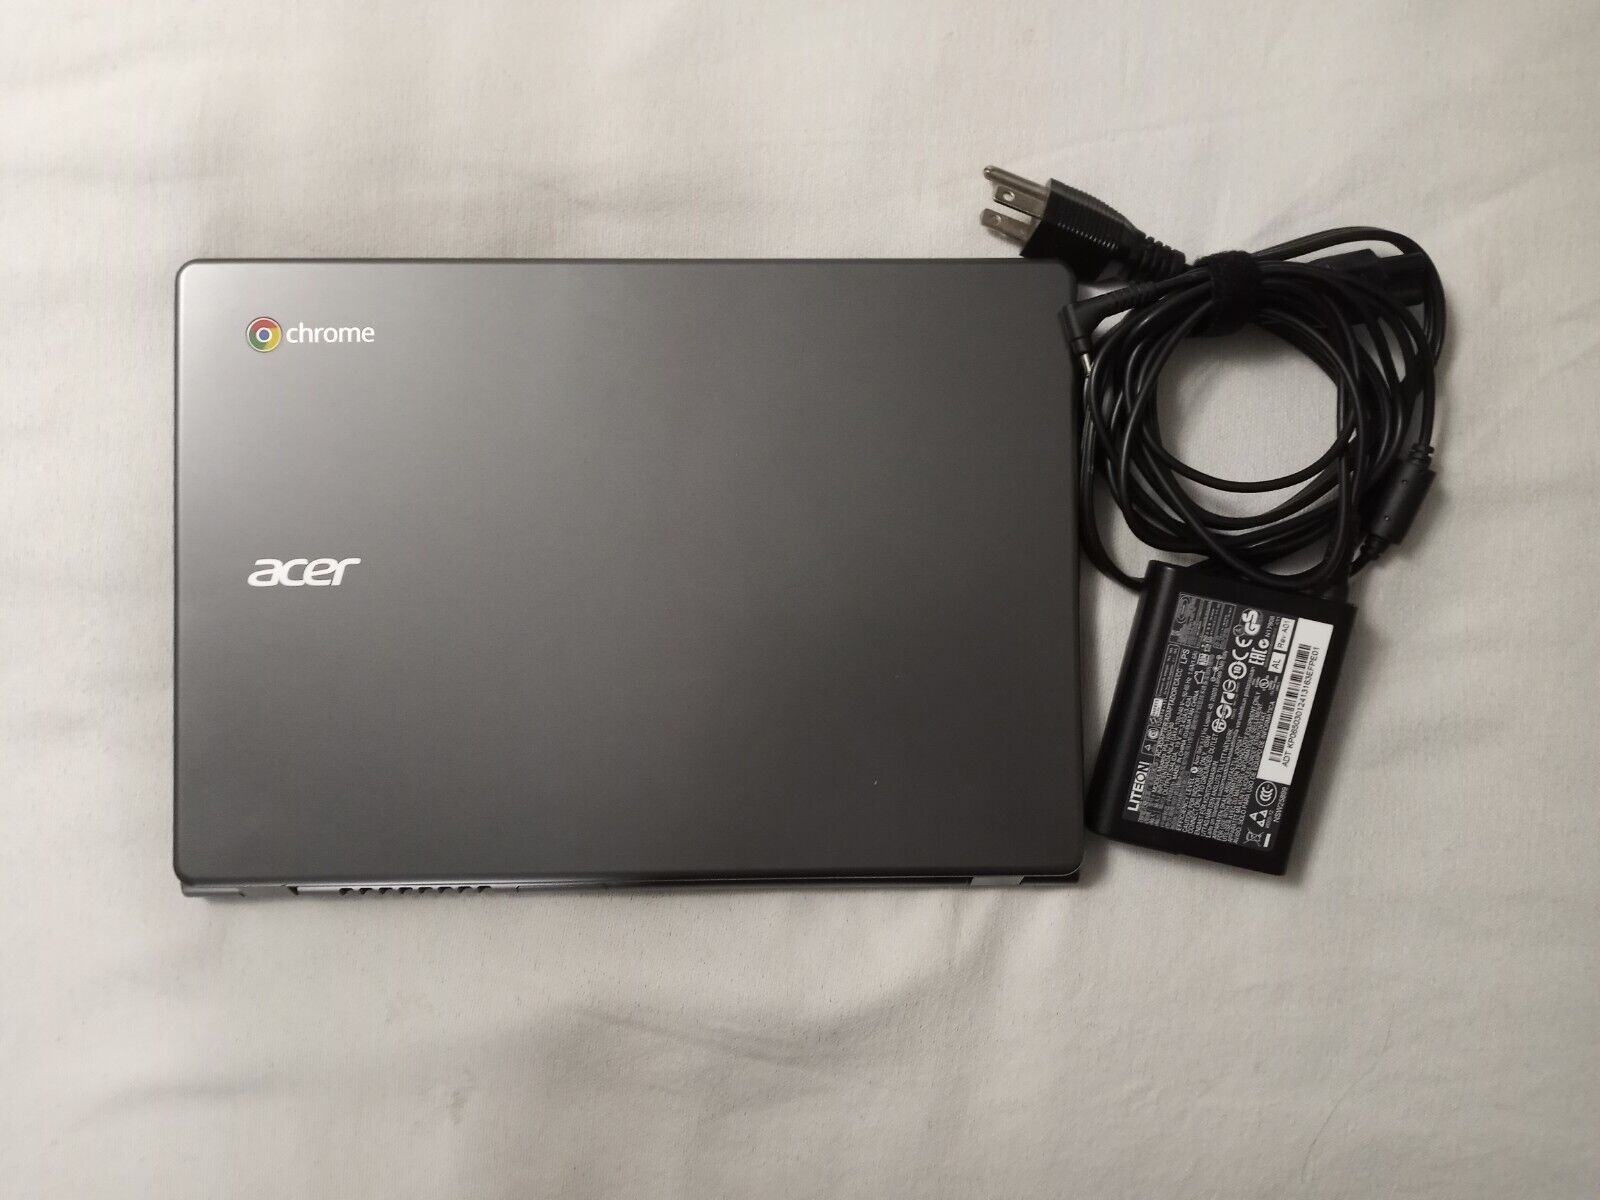 Acer ZHN C720 2848 Chromebook with Charger, Pre-owned